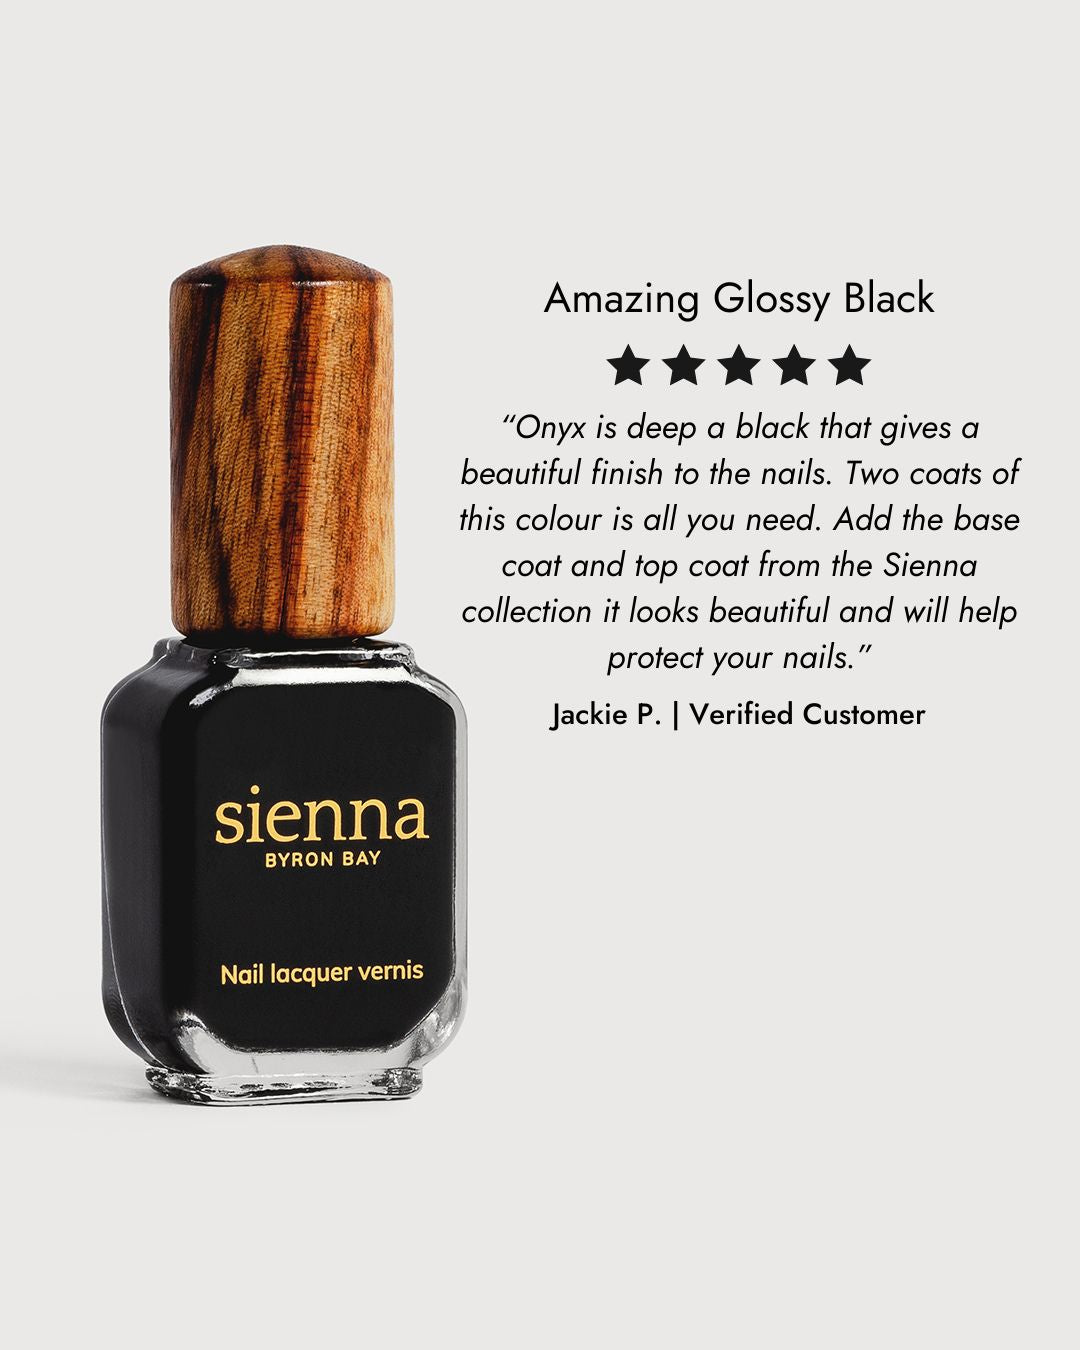 jet black nail polish glass bottle with 5 star review